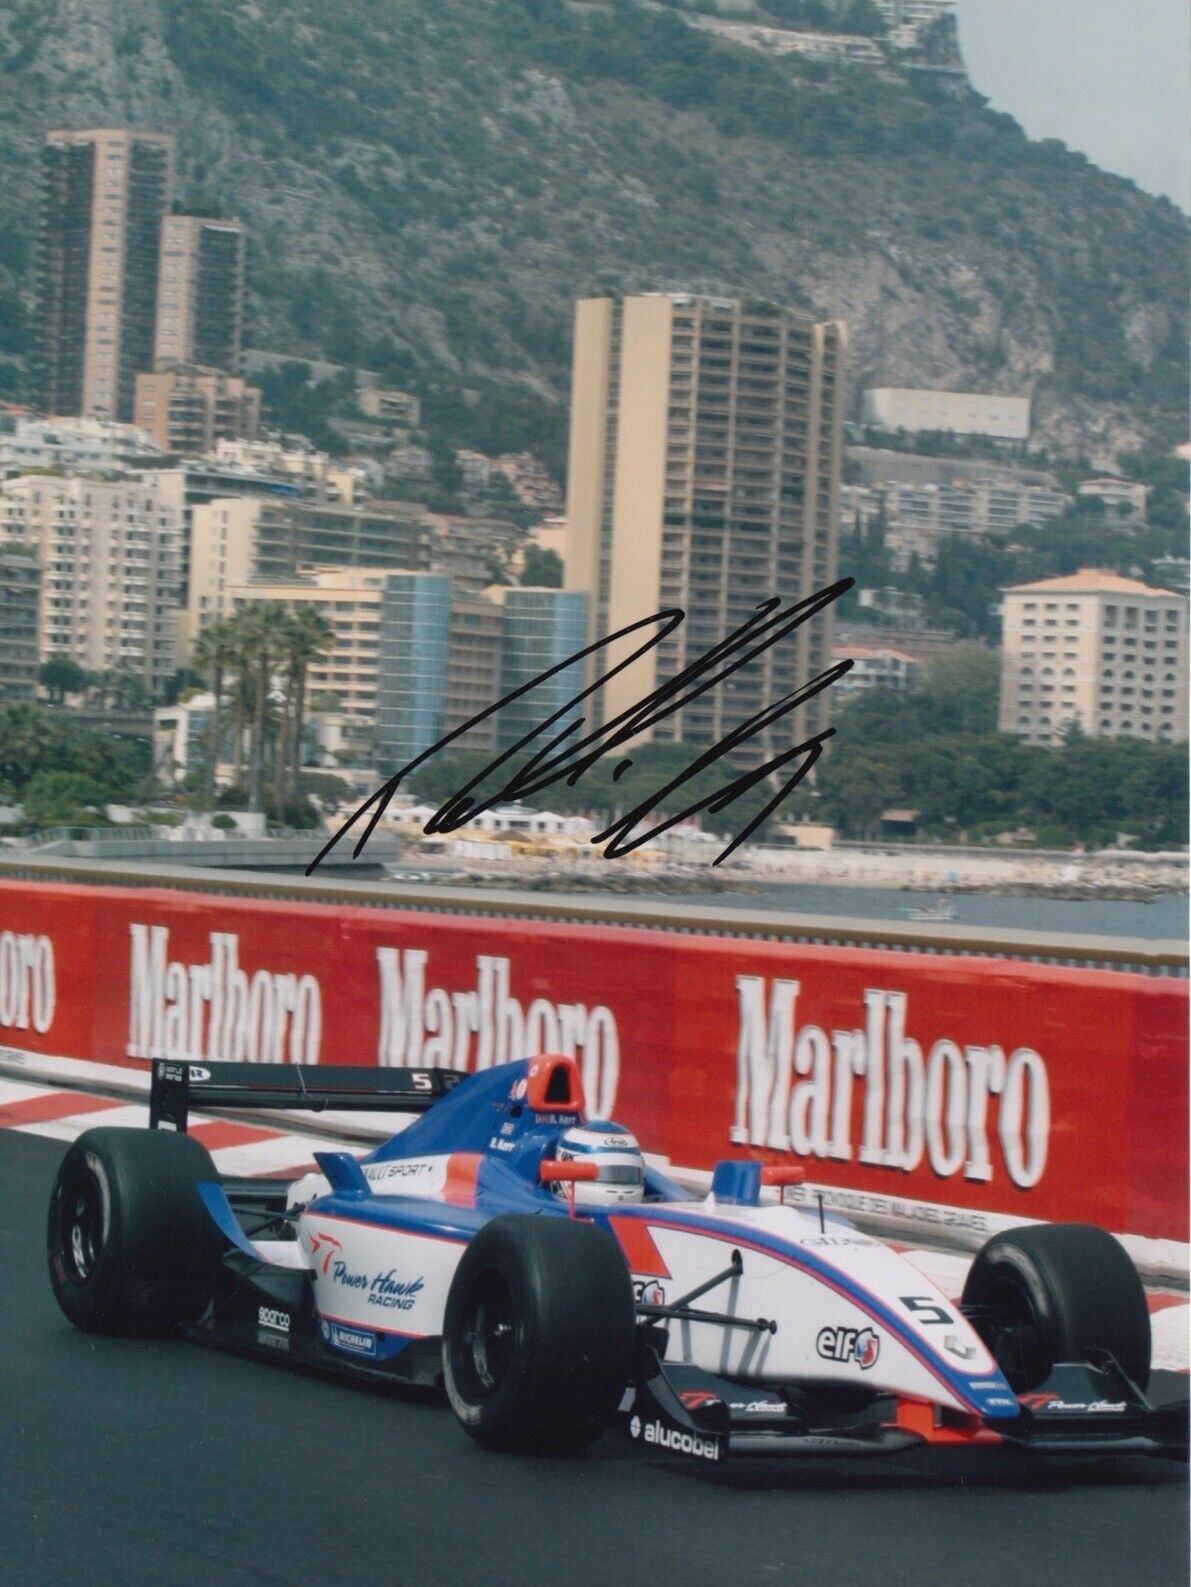 Robbie Kerr Hand Signed 8x6 Photo Poster painting - Renault World Series Autograph 23.